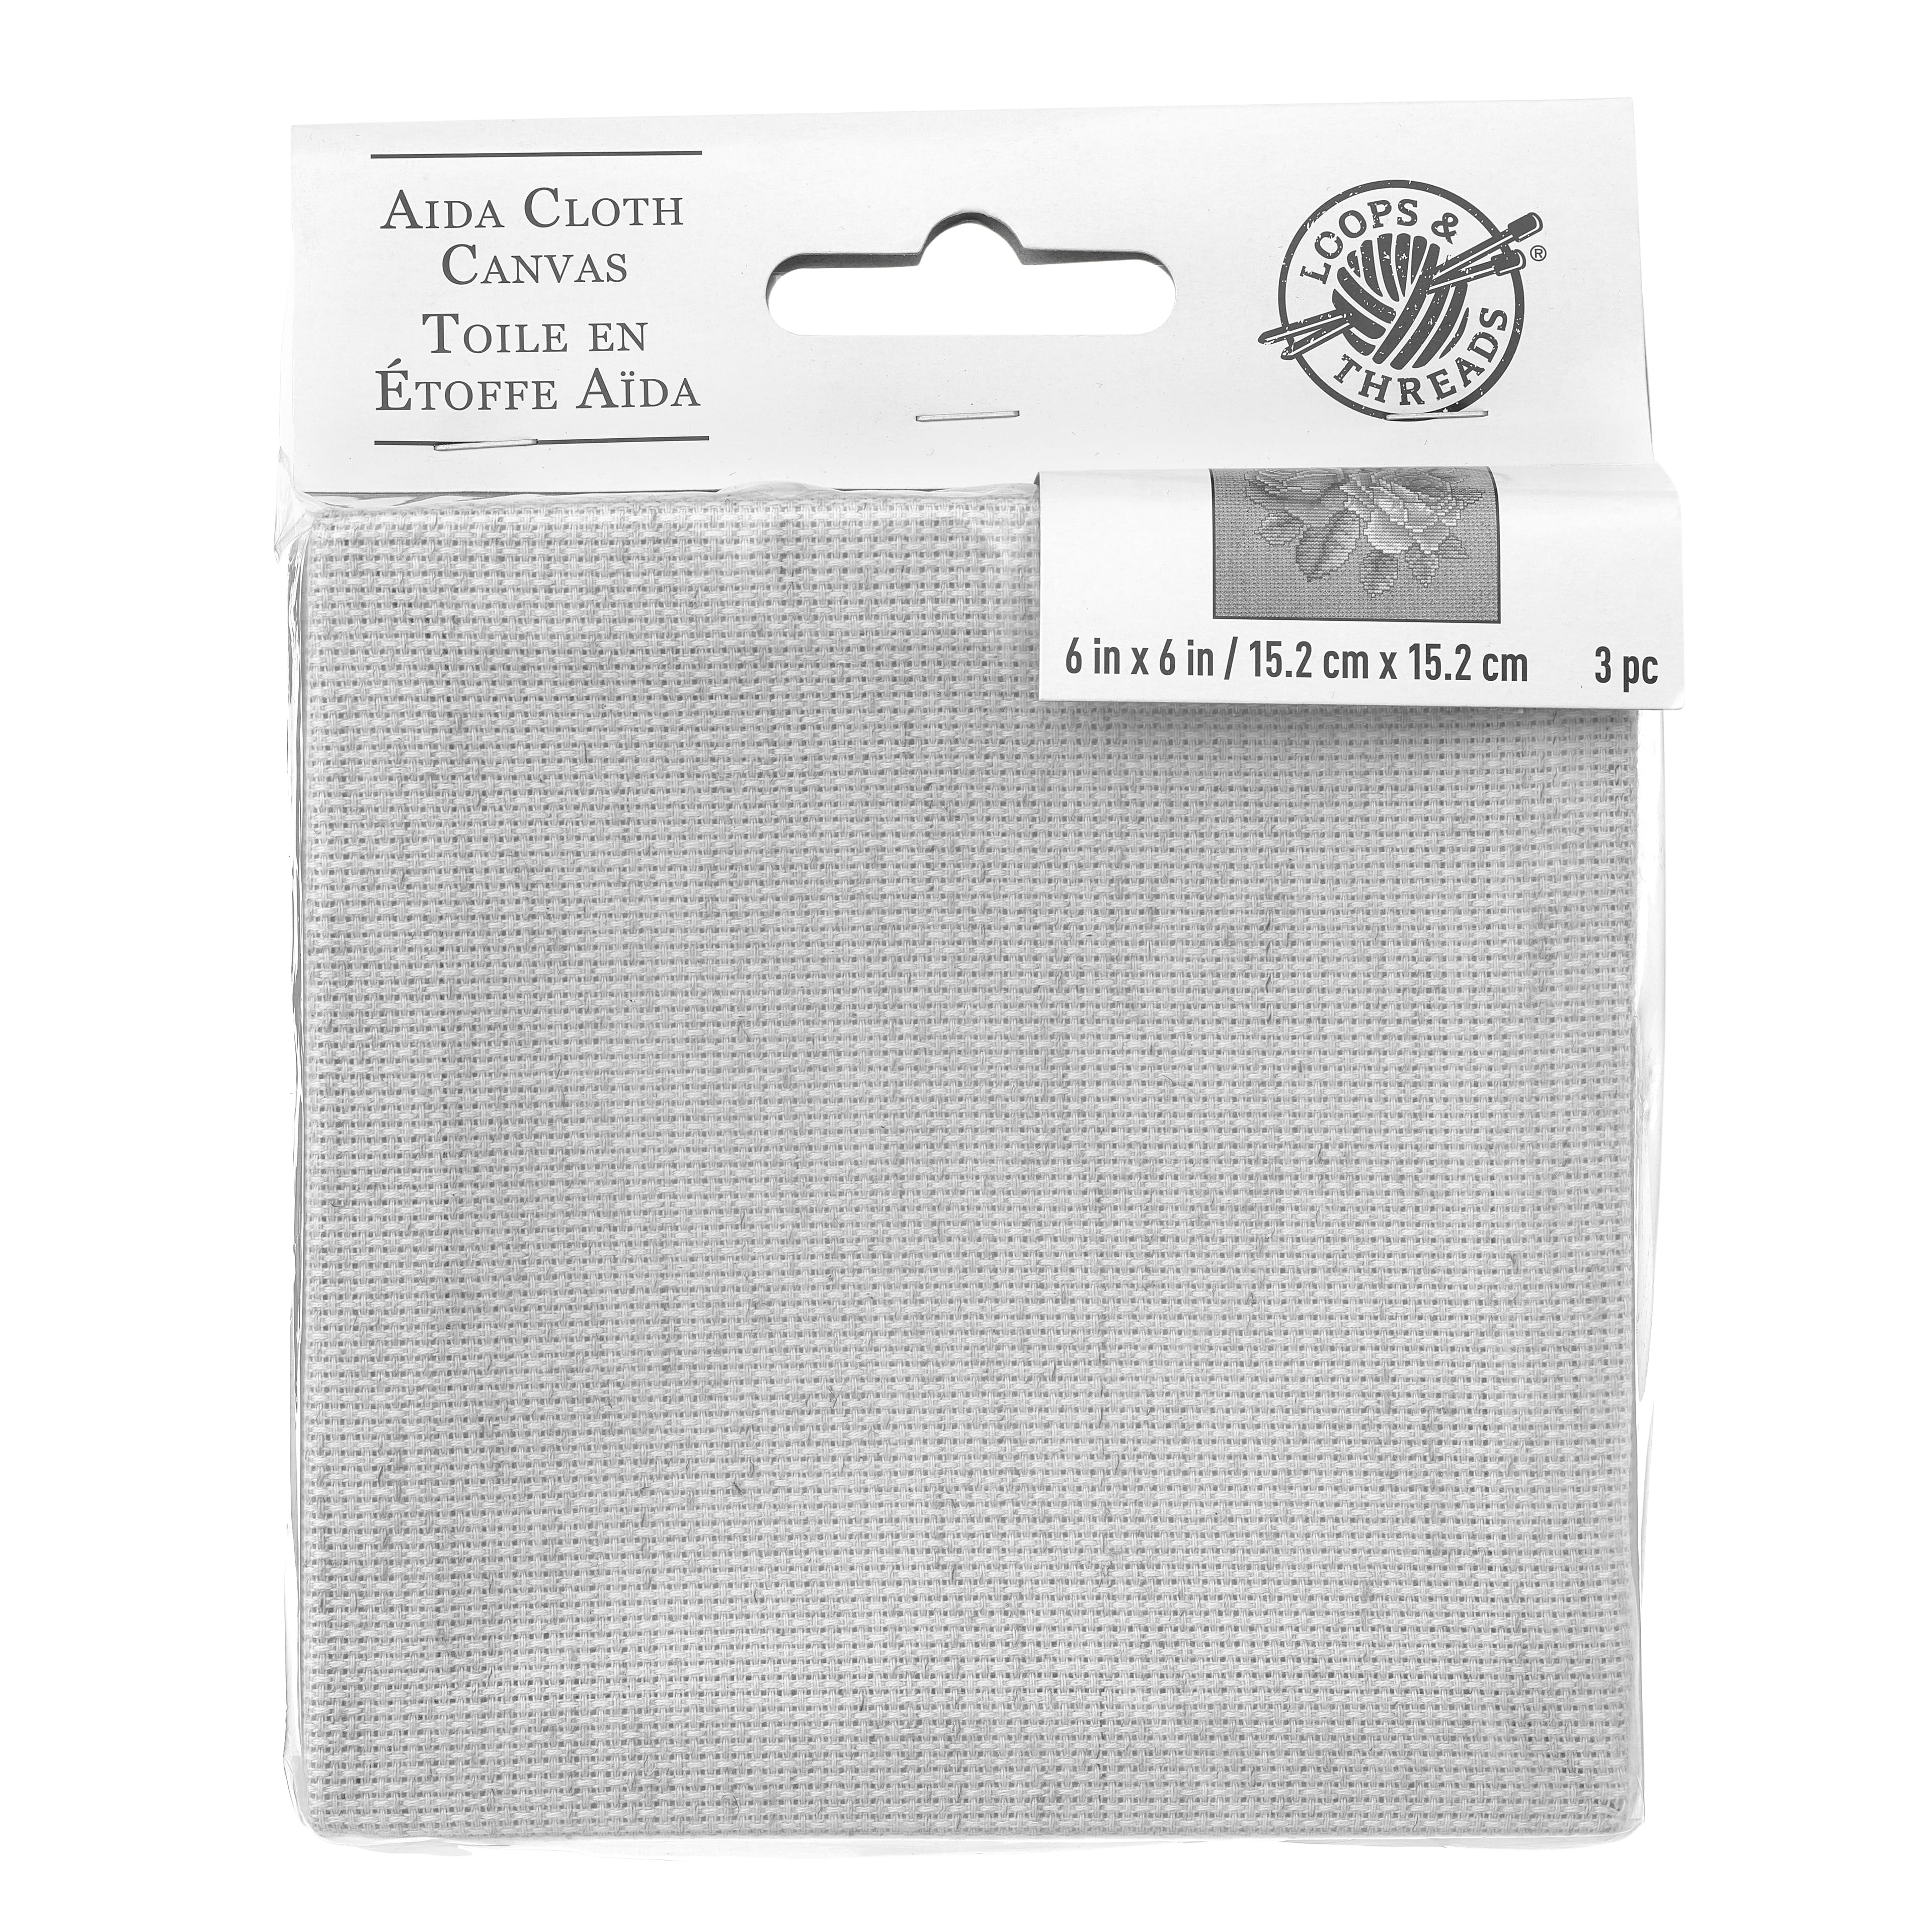 12 Packs: 3 ct. (36 total) Aida Cloth Canvas by Loops & Threads®